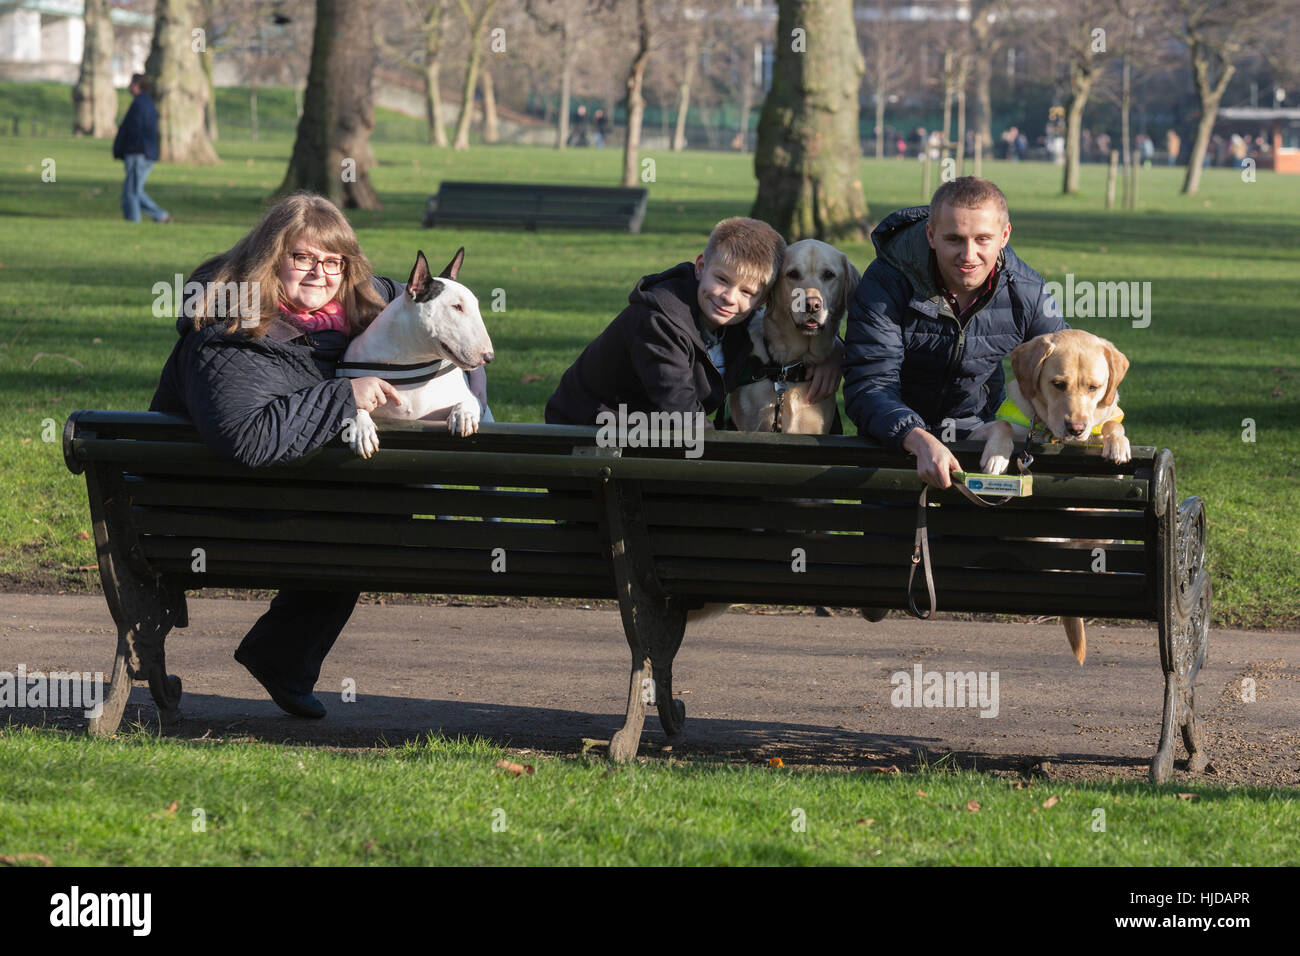 London, UK. 24th Jan, 2017. L-R: Bowser, the Bull Terrier, with owner Sally Degan, 26, from Scunthorpe, Lincs, Caddie the Labrador Retriever autism awareness dog with owner Joel Sayer, 13, from Newquay, Cornwall, Hudson, the Labrador Retriever guide dog with owner Nathan Edge, 22, from North Hykeham, Lincs. The Kennel Club and Eukanuba have selected four inspiring Hero Dogs as the 2017 finalists. They forward to the public vote with the winner being announced at Crufts. Charlie, the Military Dog with the British Army did not attend the photocall. Credit: Vibrant Pictures/Alamy Live News Stock Photo